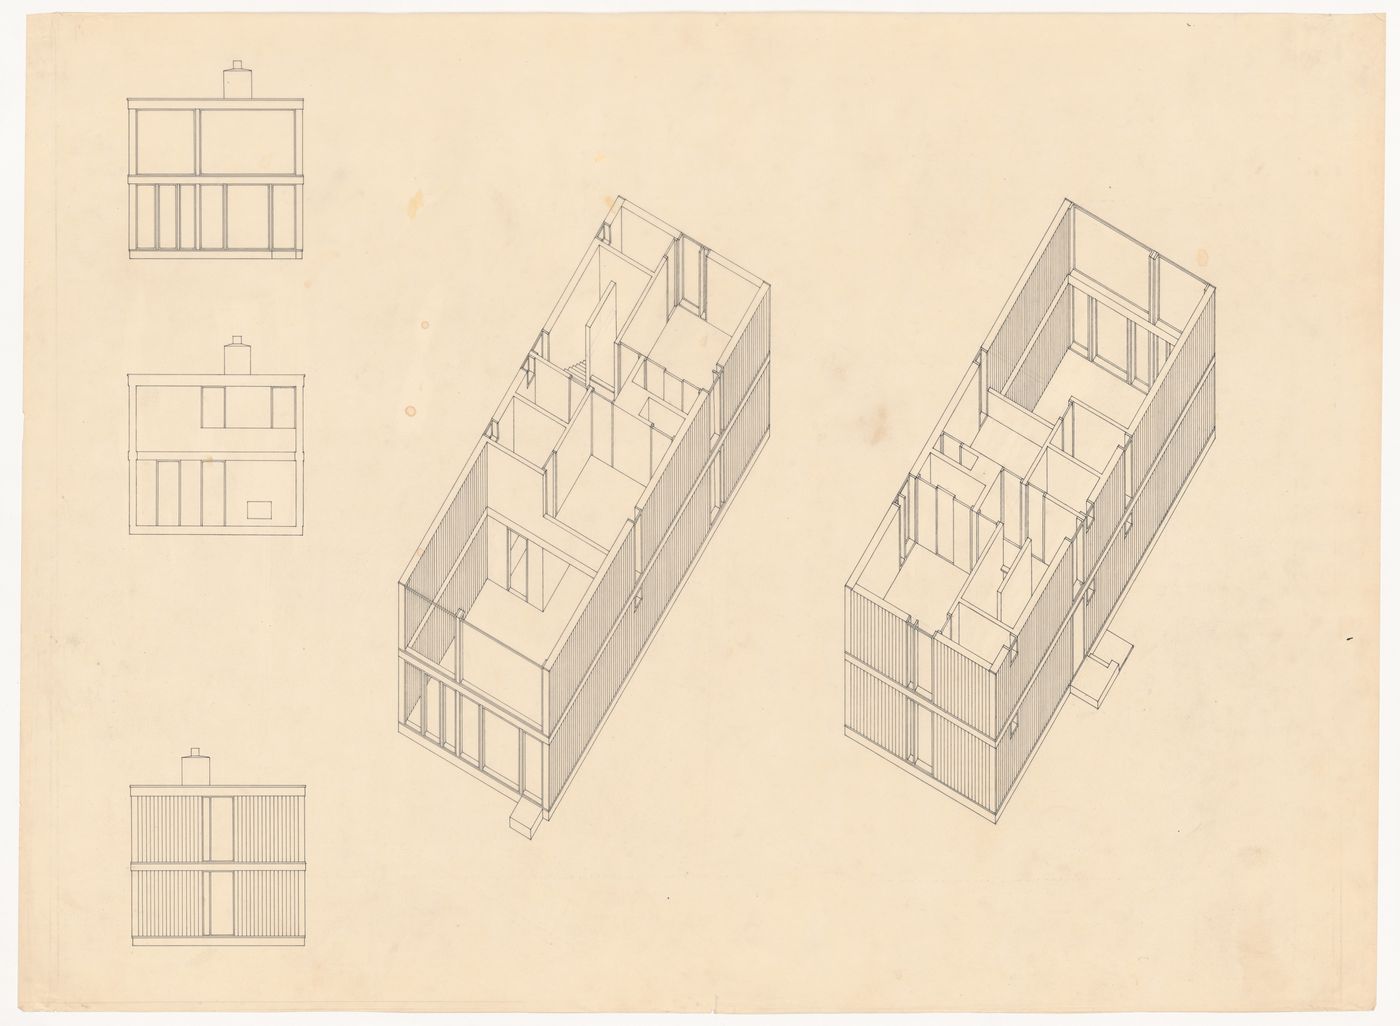 Axonometrics and elevations for Ithaca House